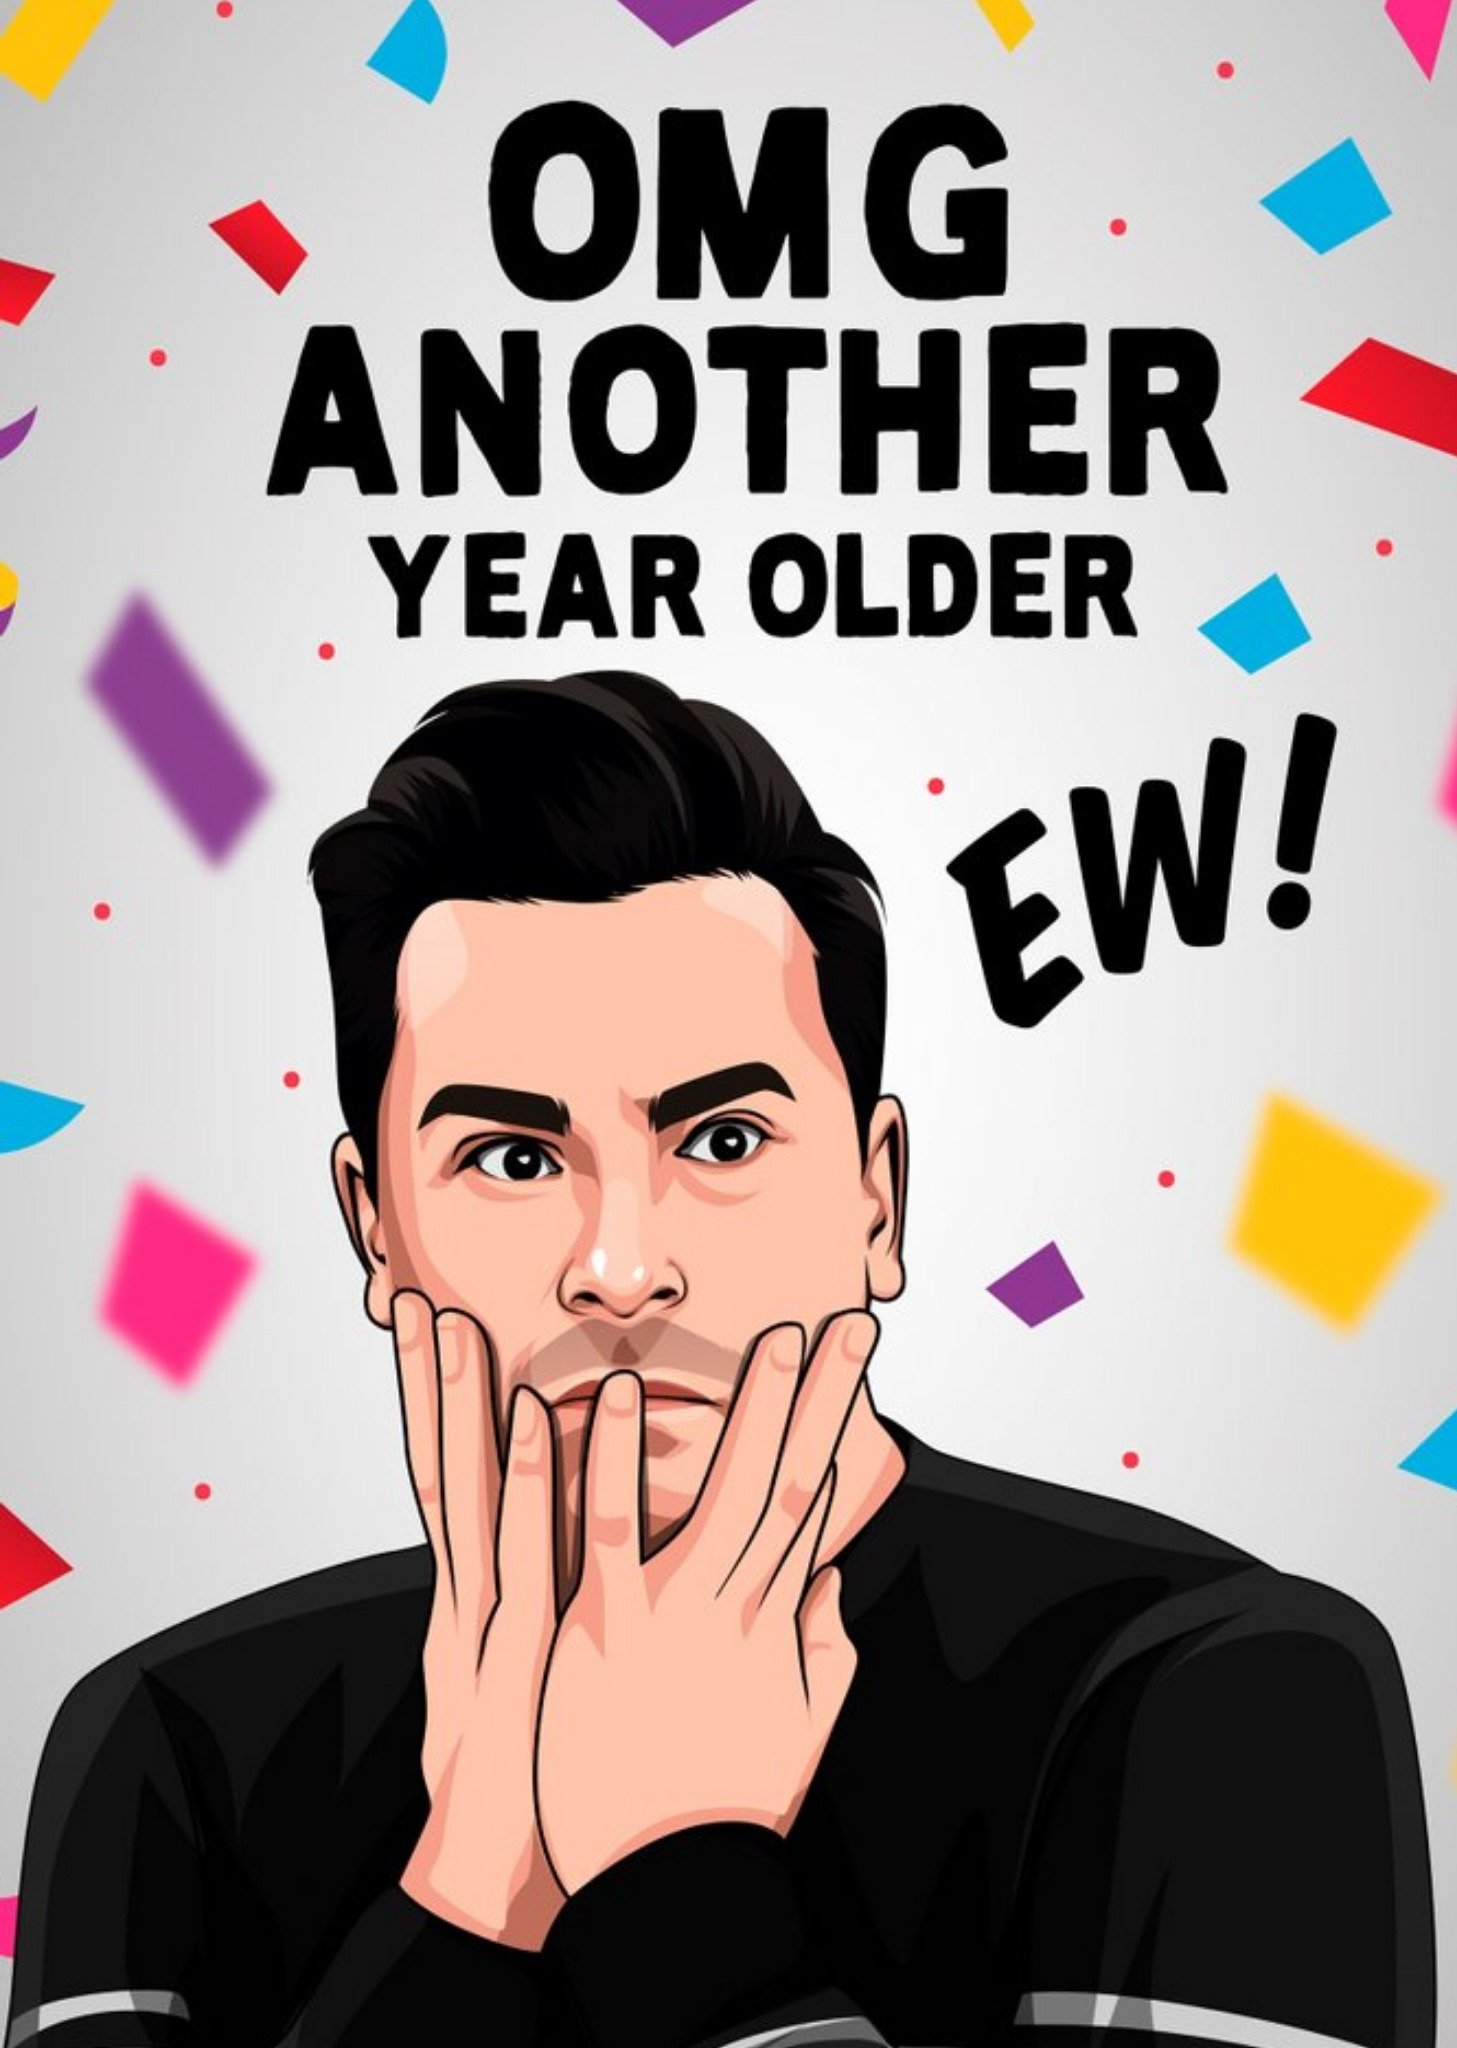 All Things Banter Funny Spoof Tv Omg Another Year Older Ew Birthday Card Ecard